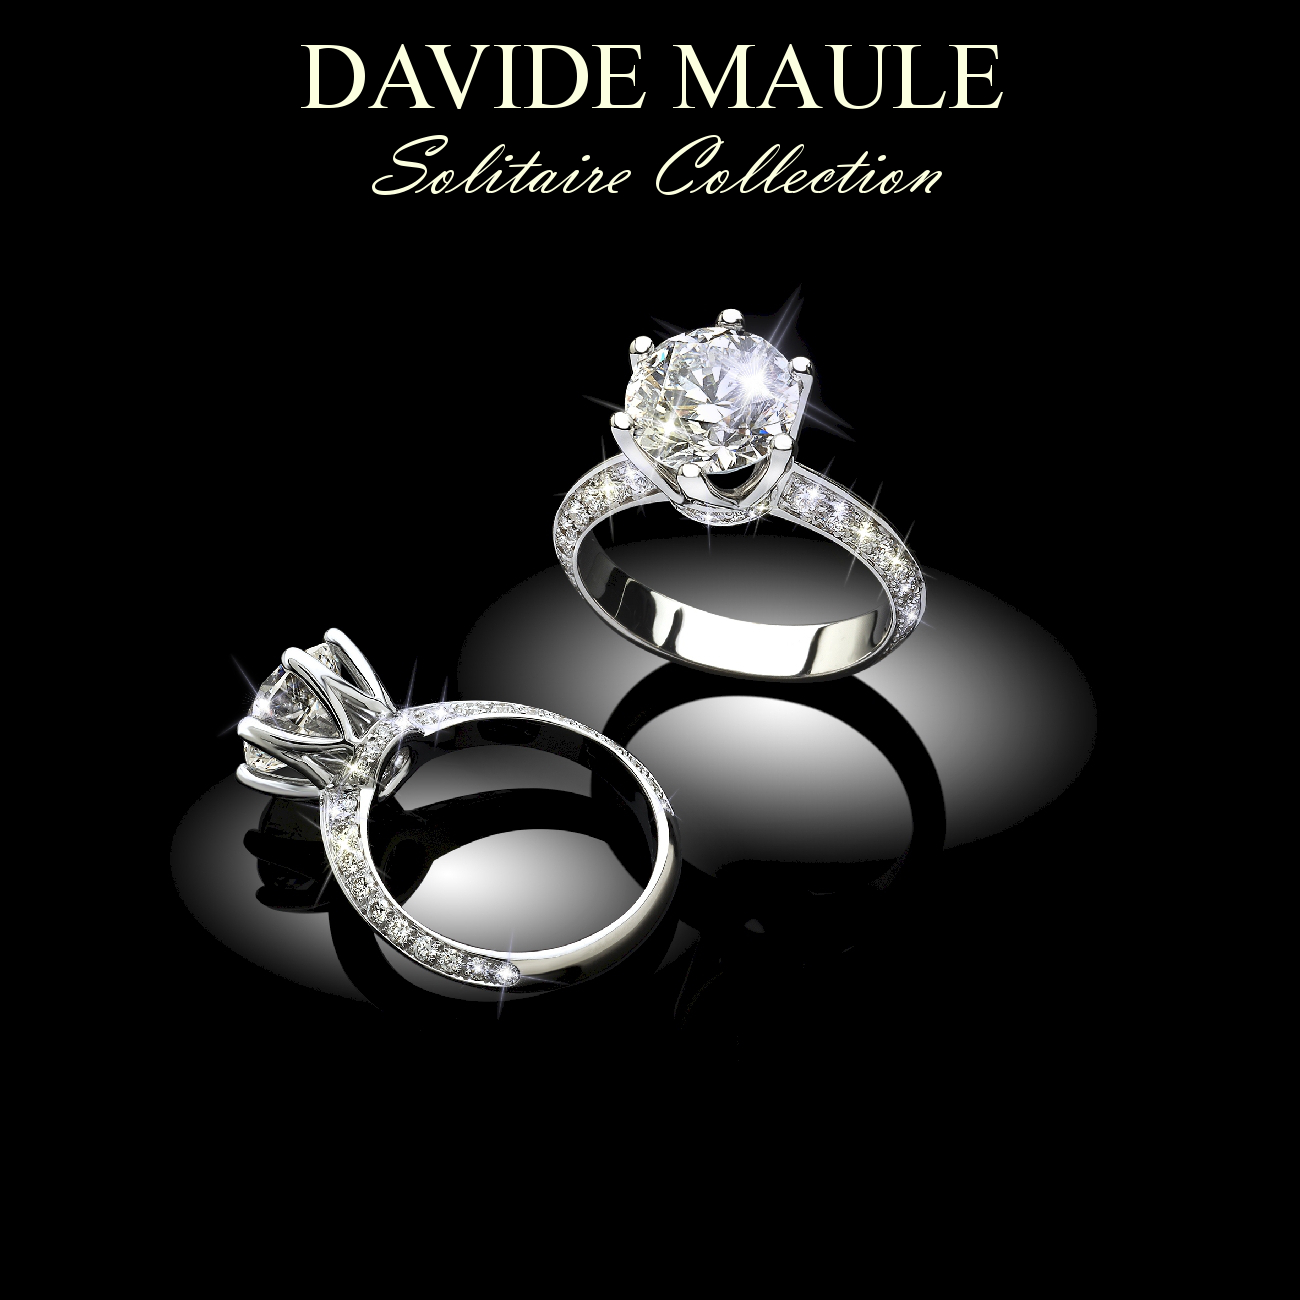 Exclusive engagement rings